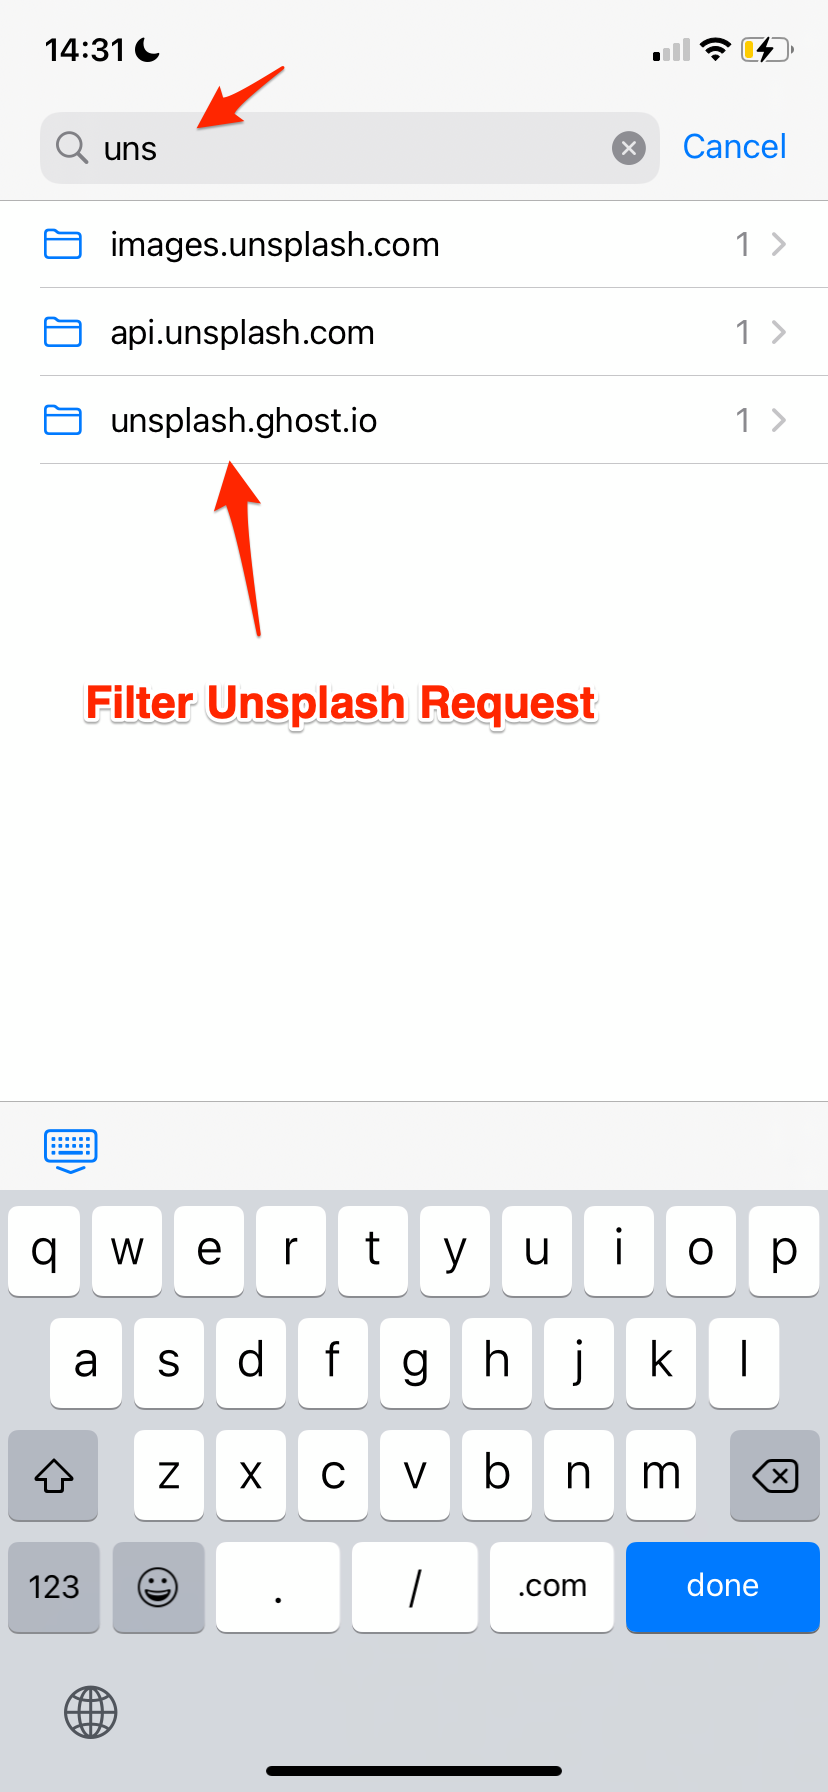 Filter Unsplash traffic with the Search Bar